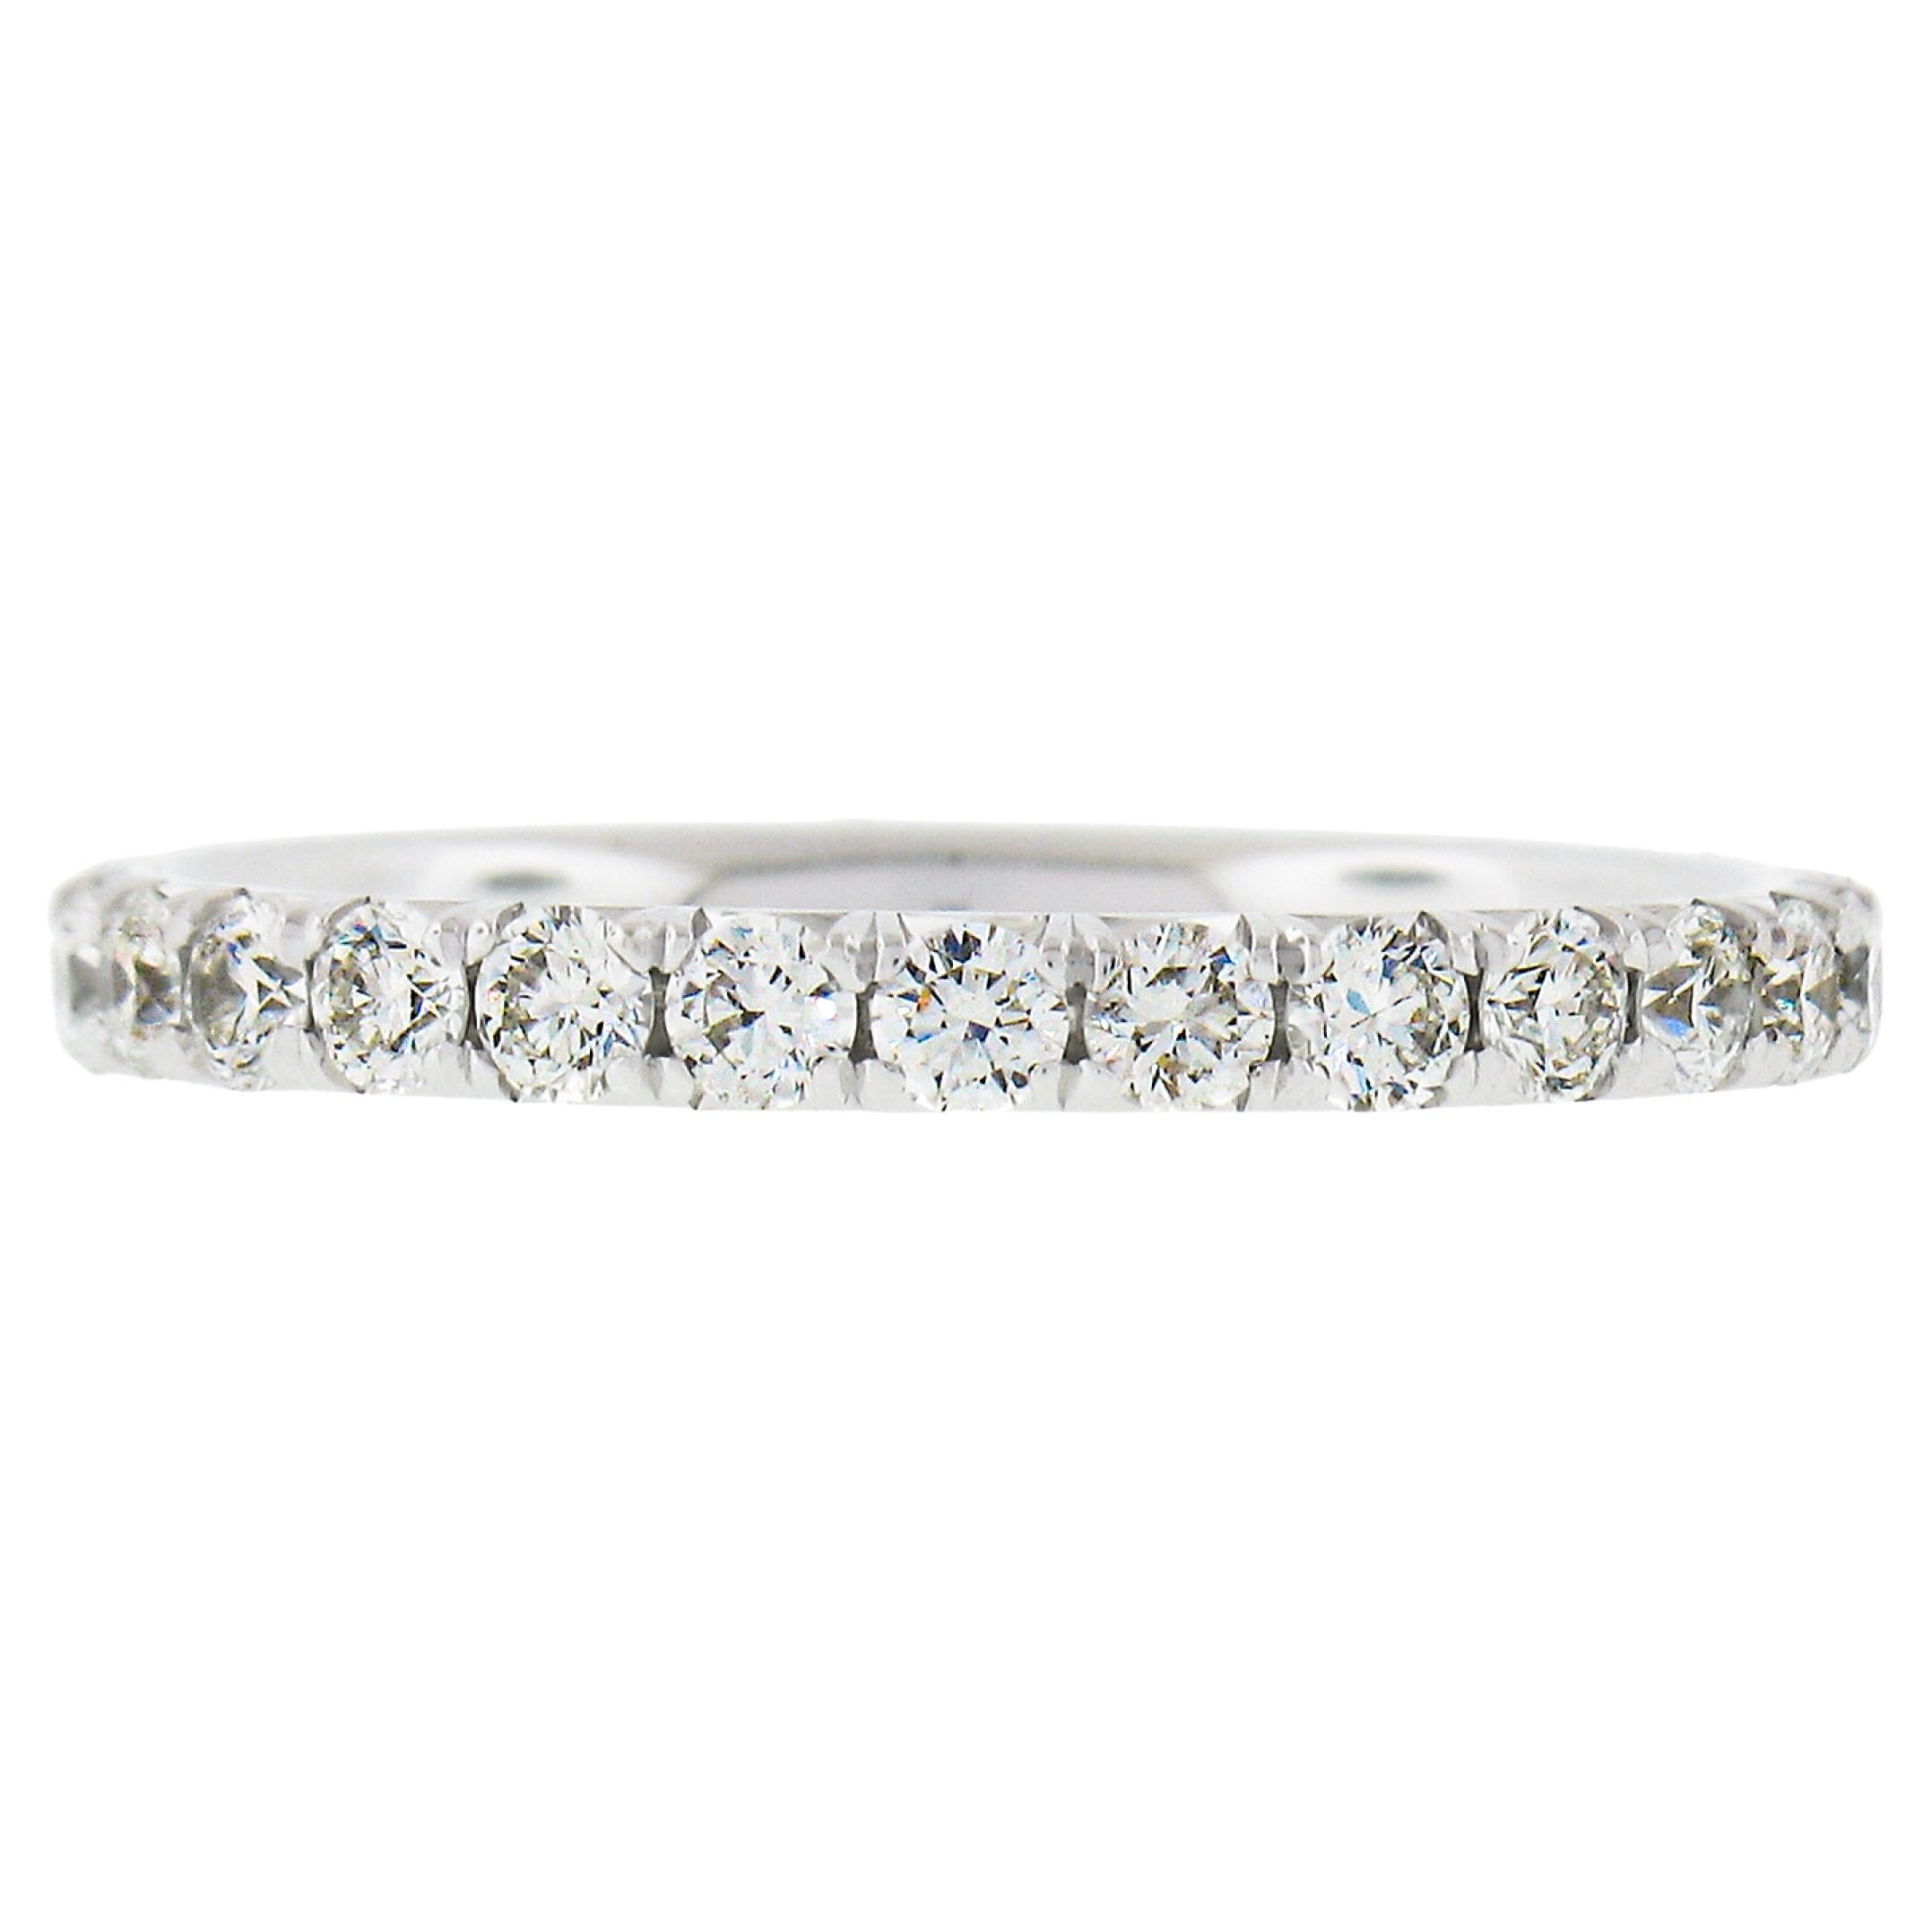 Blue Nile .950 Platinum 1.08ctw Pave Diamond Stack Wedding Eternity Band Ring For Sale